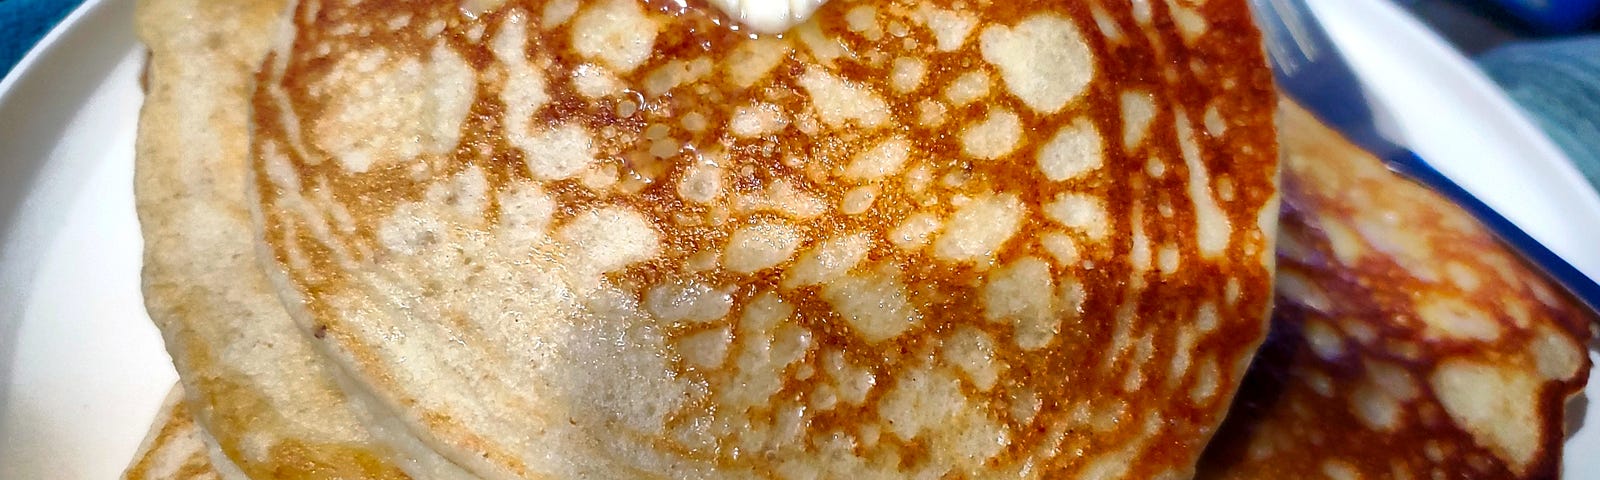 Looking down onto a white plate with large pancakes stacked on it. The top pancake has a pat of butter melting on it.